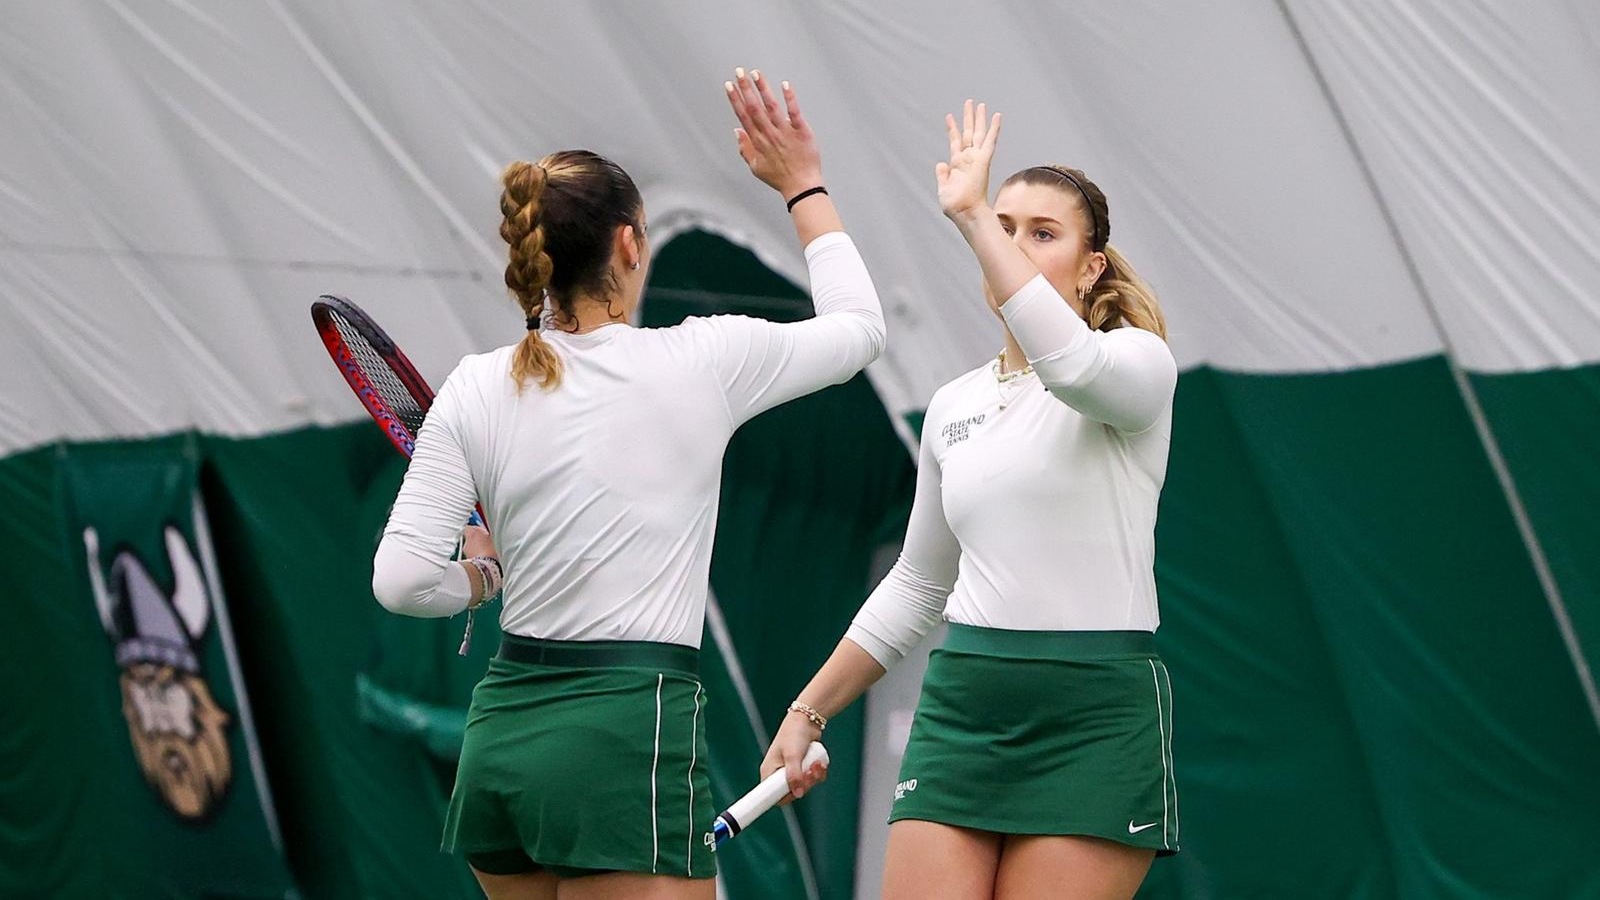 Cleveland State Women’s Tennis Earns No. 2 Seed In Upcoming #HLTennis Tournament